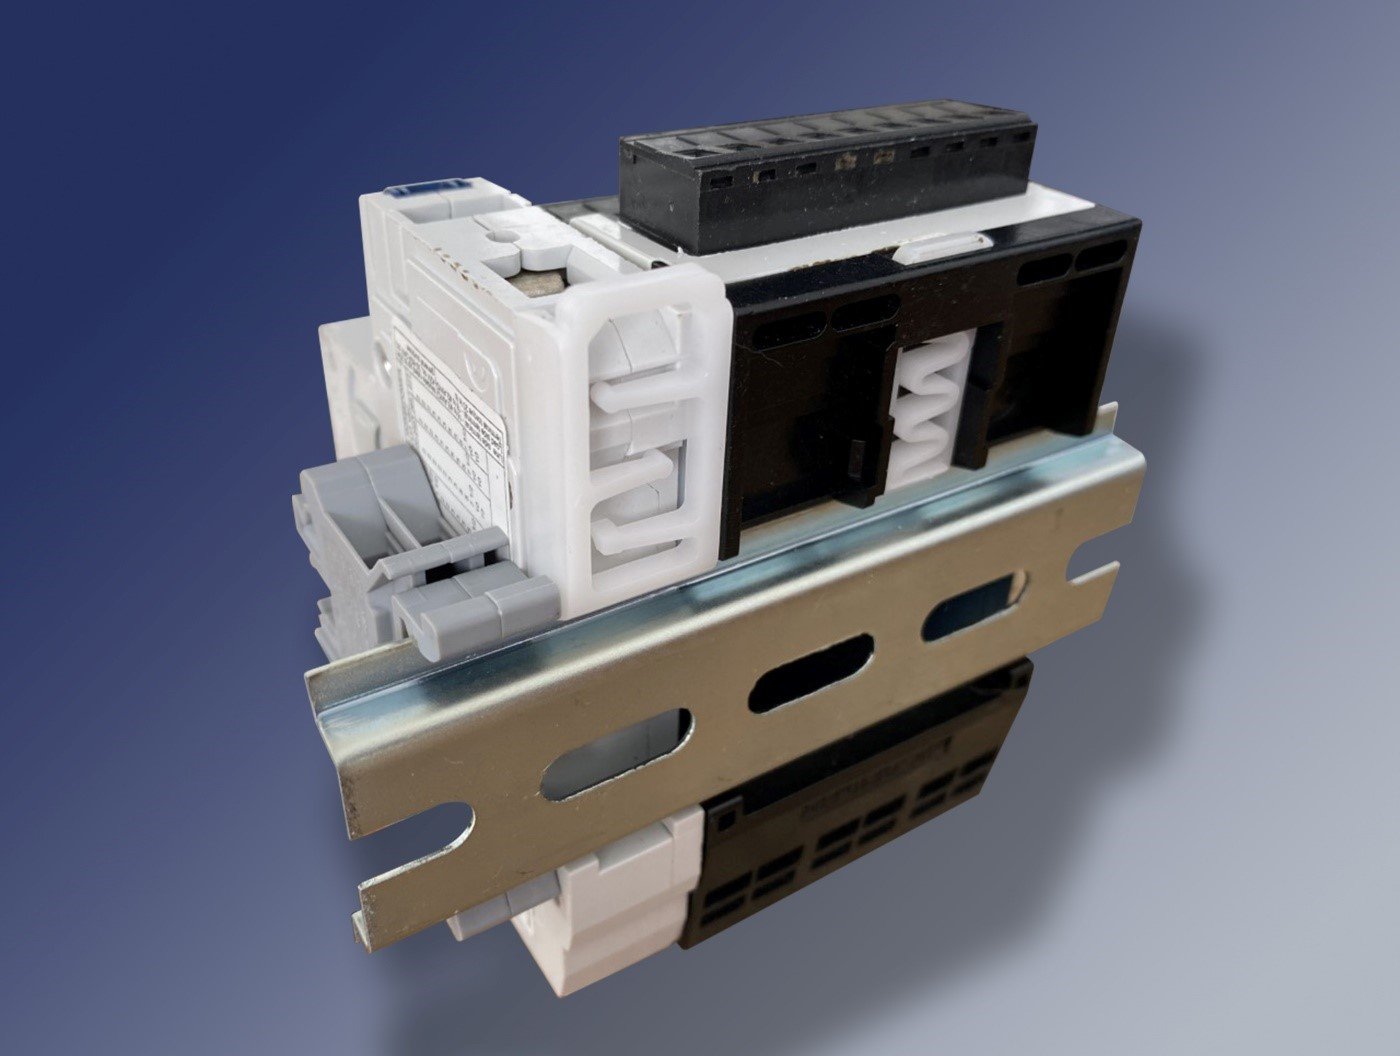 Figure 2. A rear view of a DIN rail with terminal blocks, a circuit breaker and a DIN enclosure mounted on it. They are displayed upside-down for a better view of the latches. Note the release loops at the top of the mounted devices that unclip them. Source: Altech